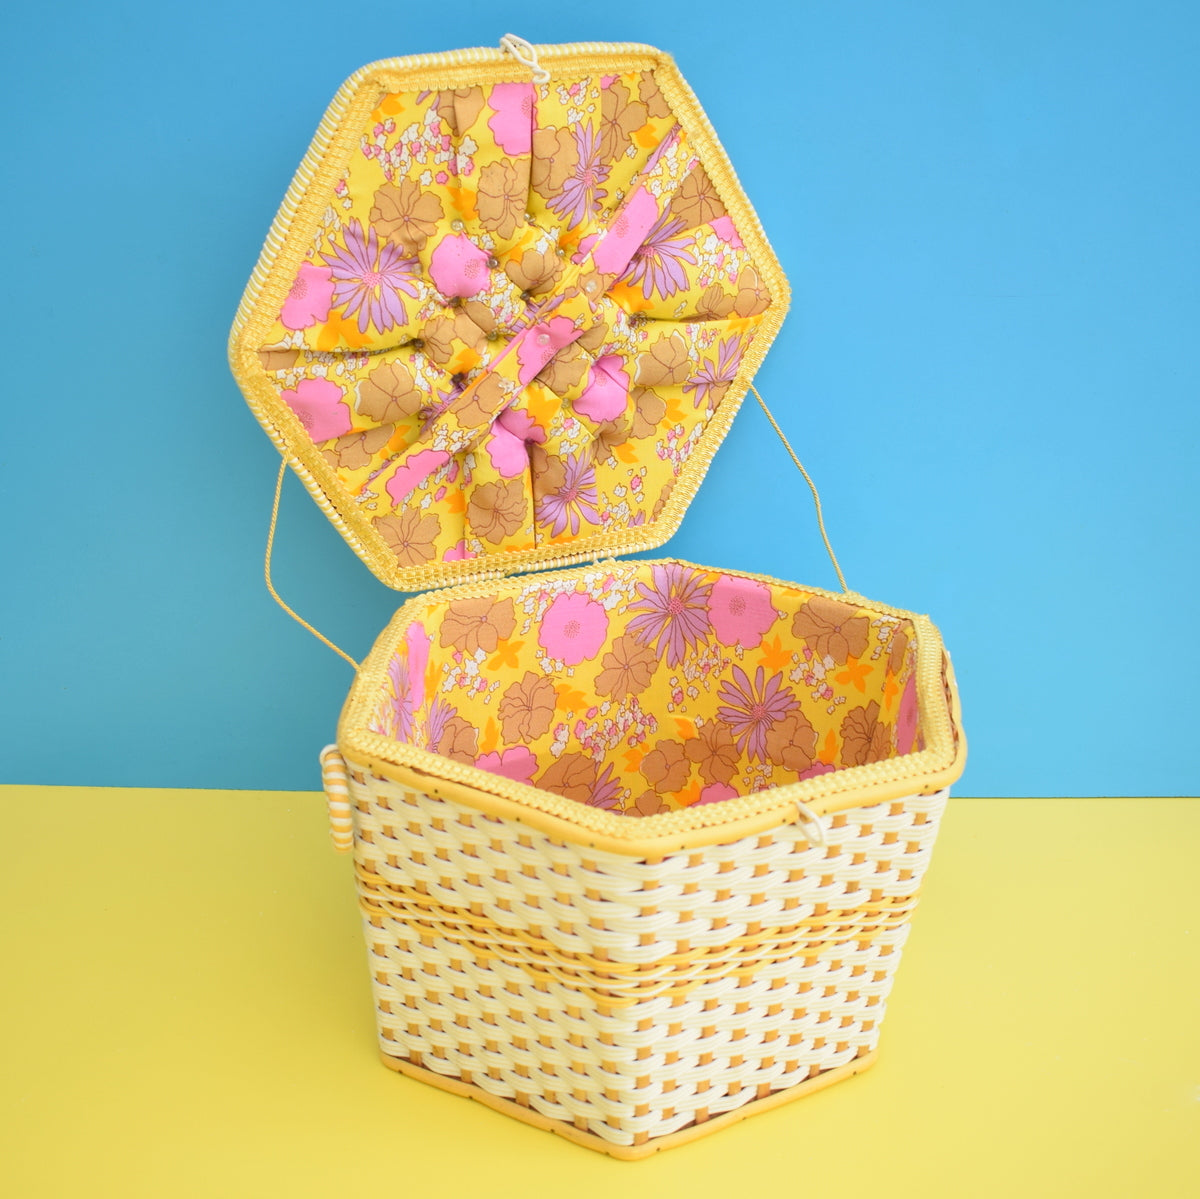 Vintage 1960s Sewing / Hobby Box - Yellow & White Woven With Flower Power